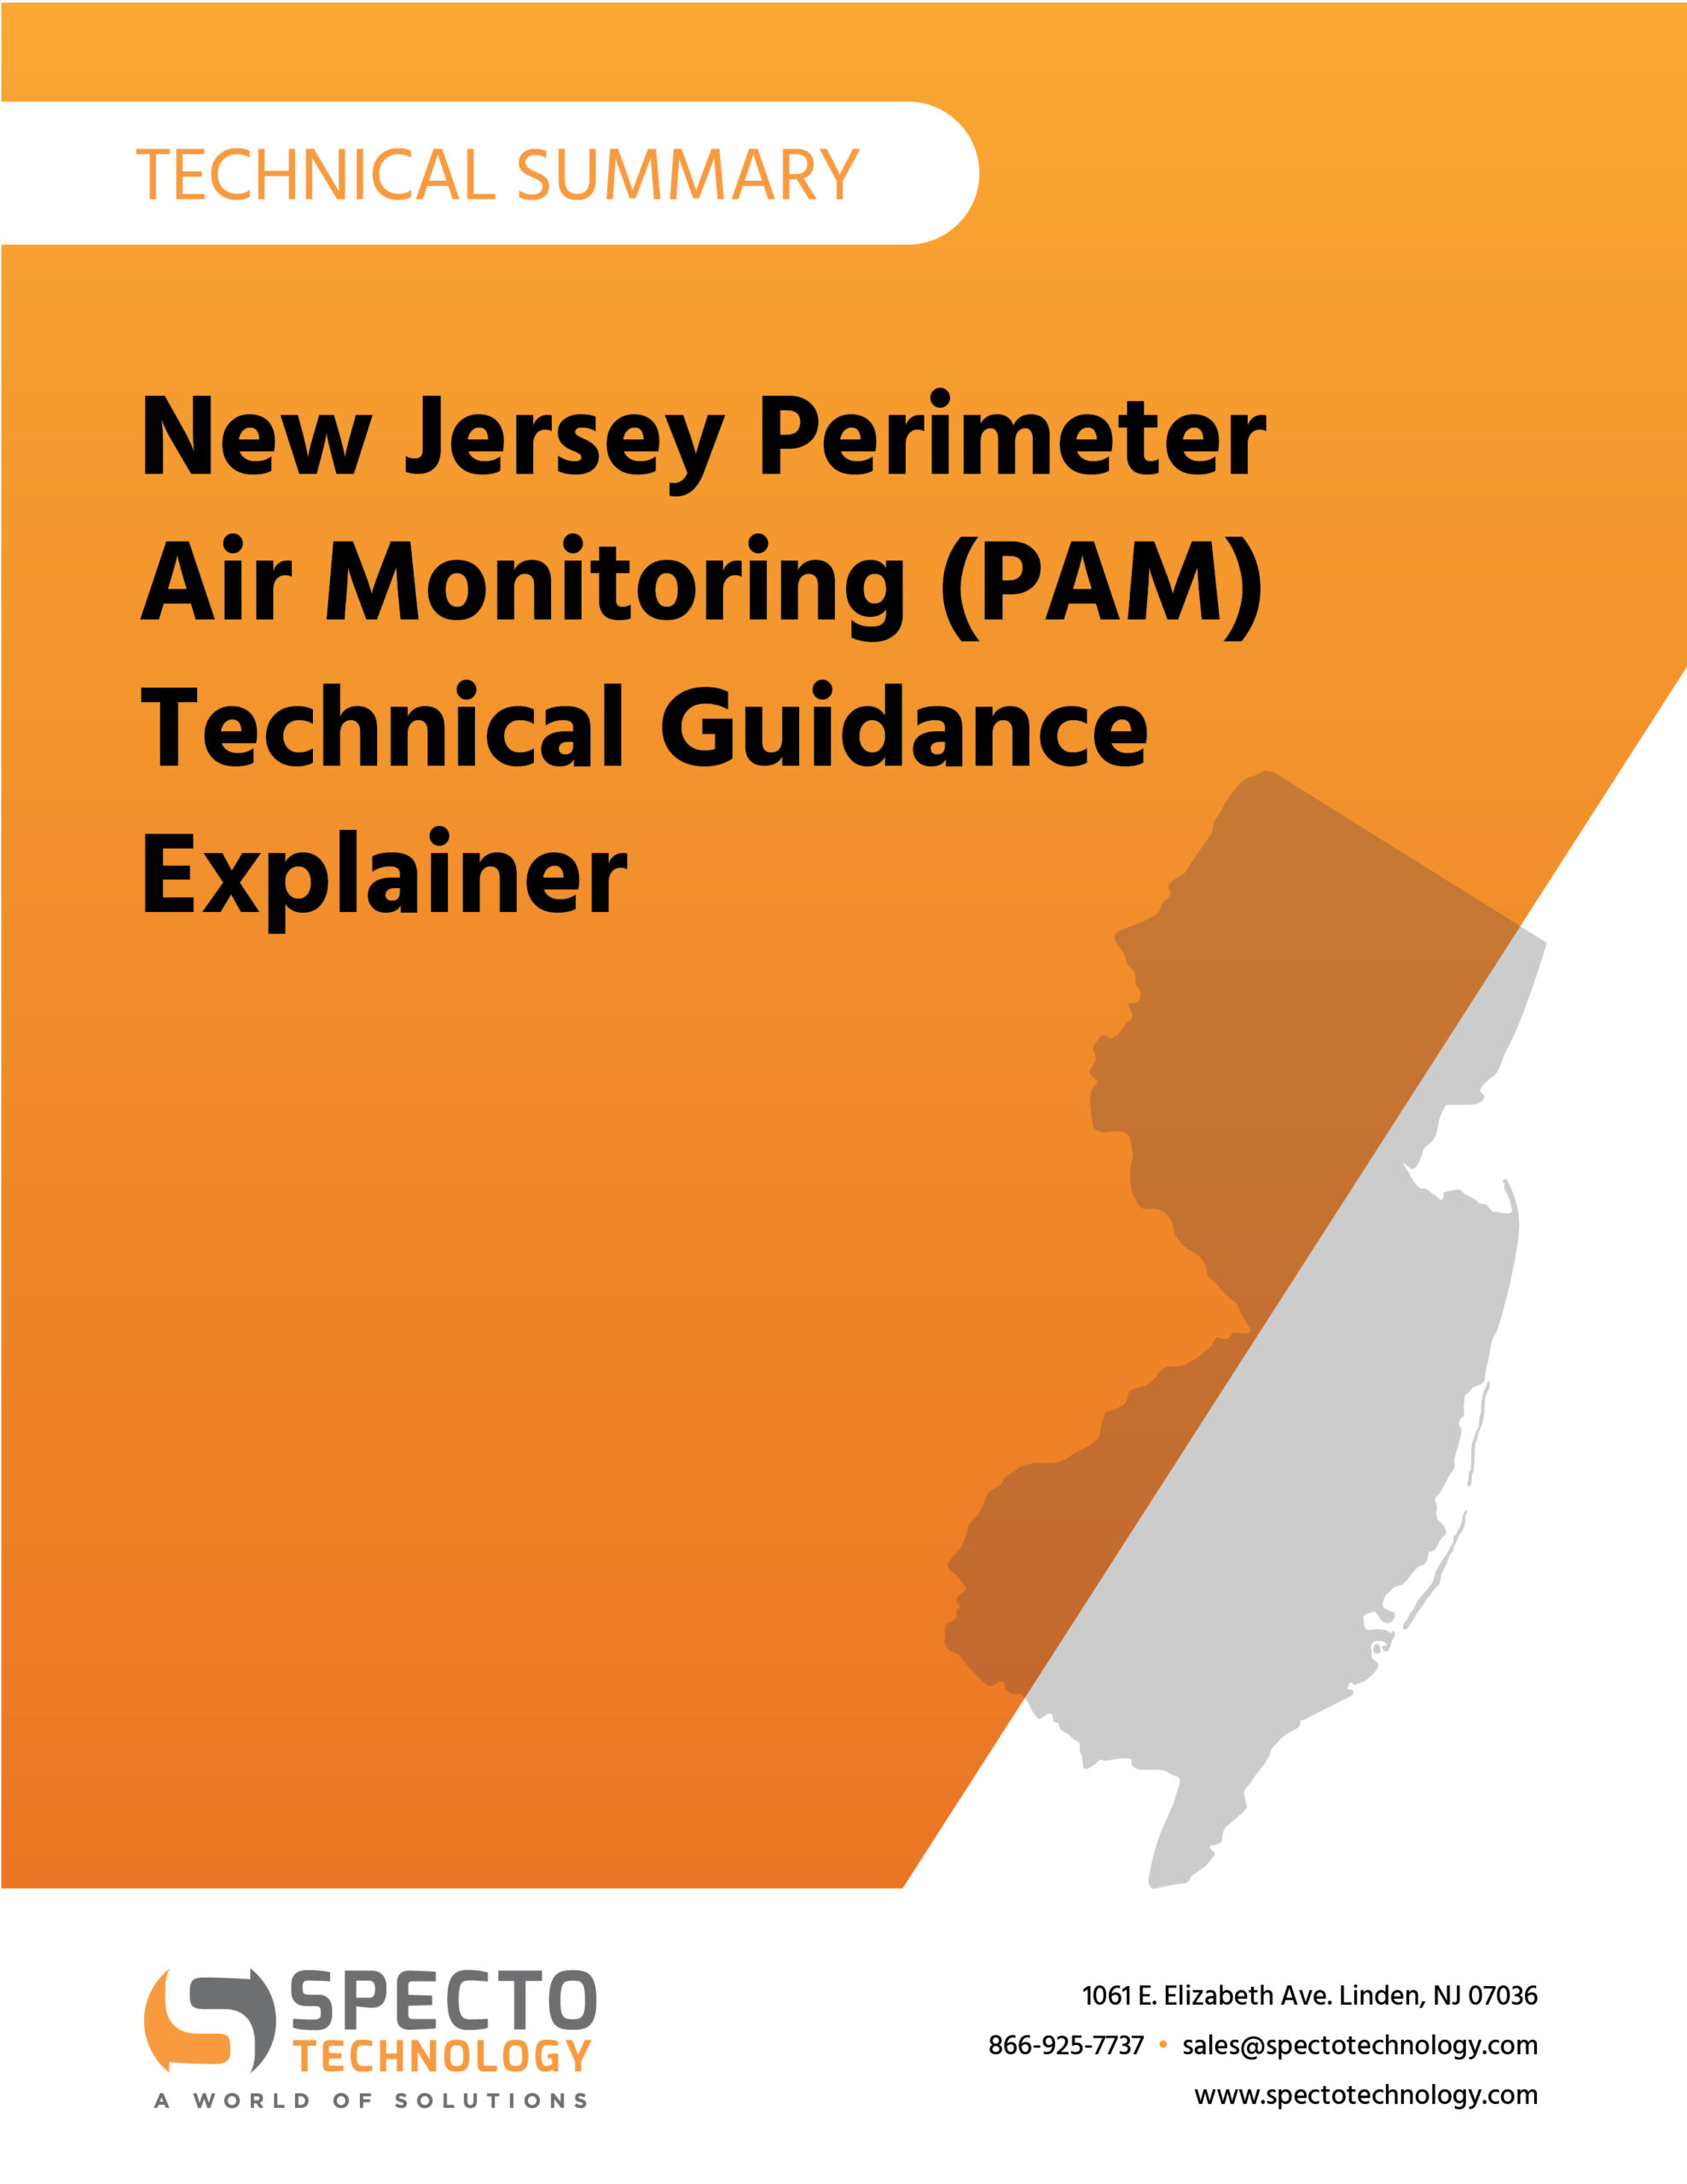 New Jersey Perimeter Air Monitoring Explainer Cover